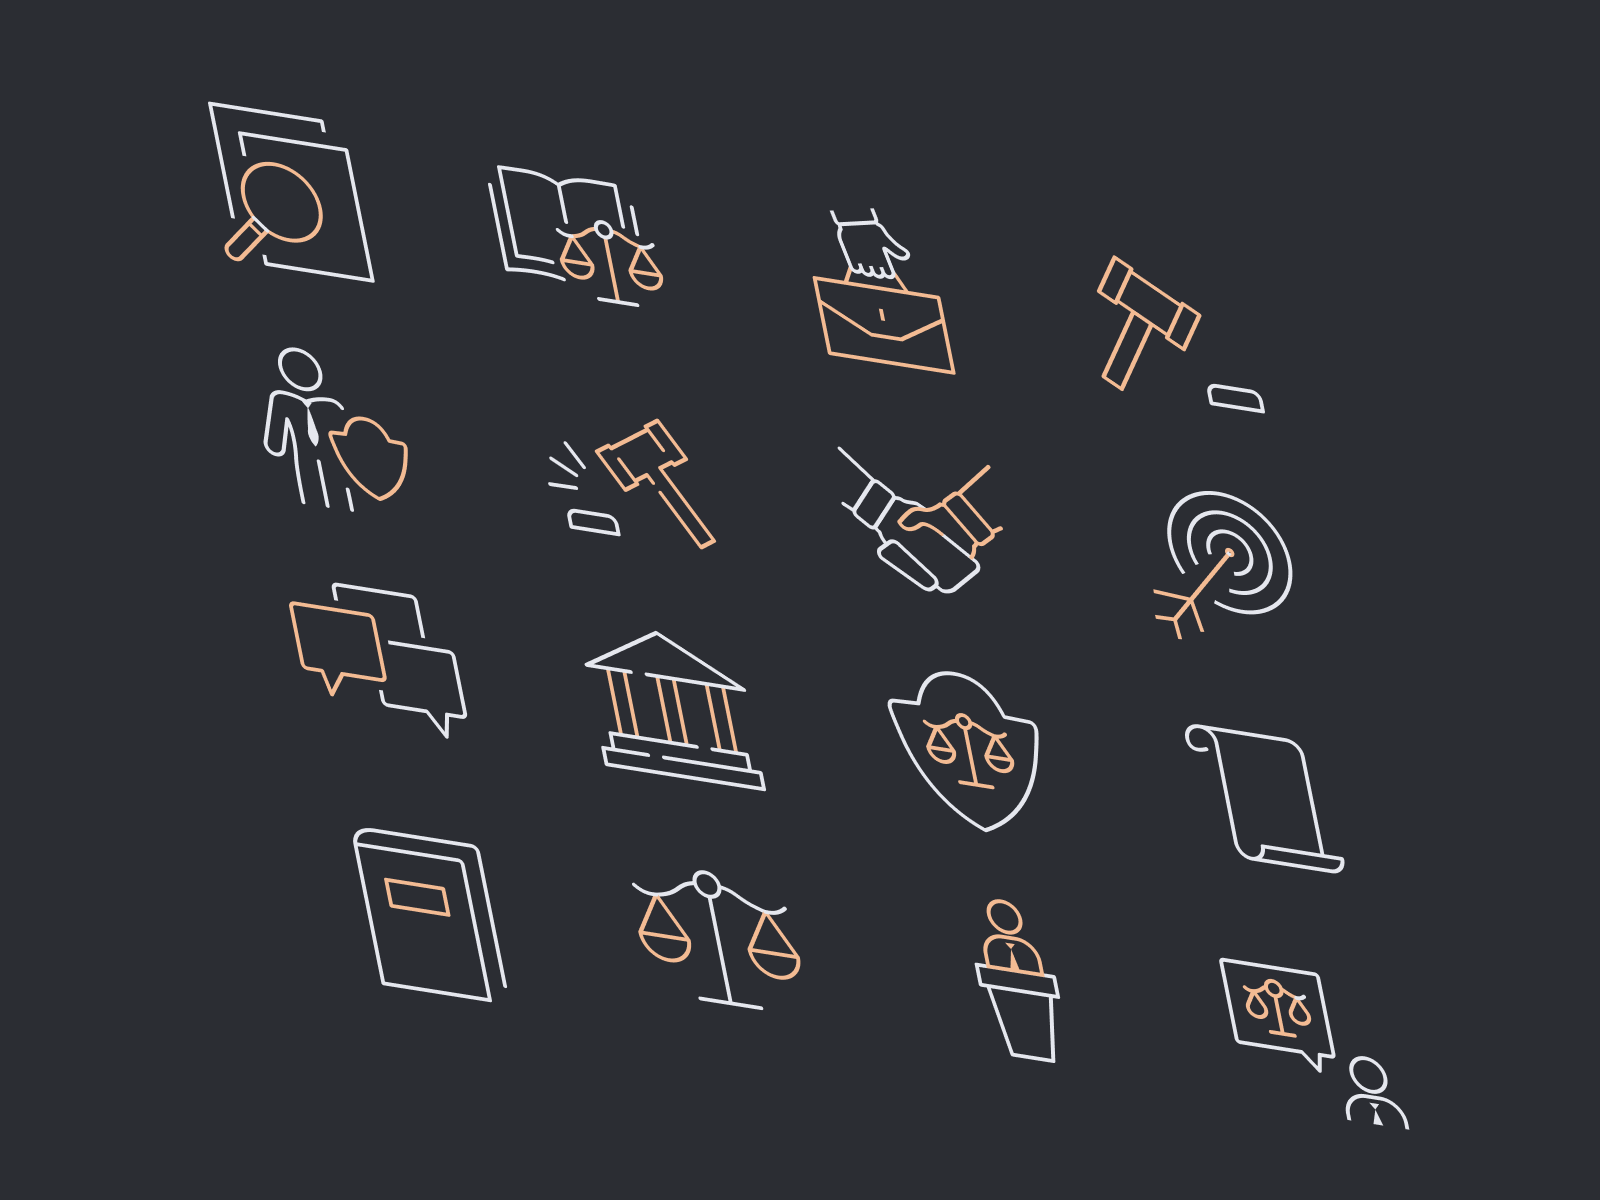 Iconography - Justicia - Law Firm & Attorney Webflow Template advocate law firm legal adviser justice legal law lawyers attorneys lawyer attorney icon pack icon system icon design icon app symbols icon set iconography icons icon webflow